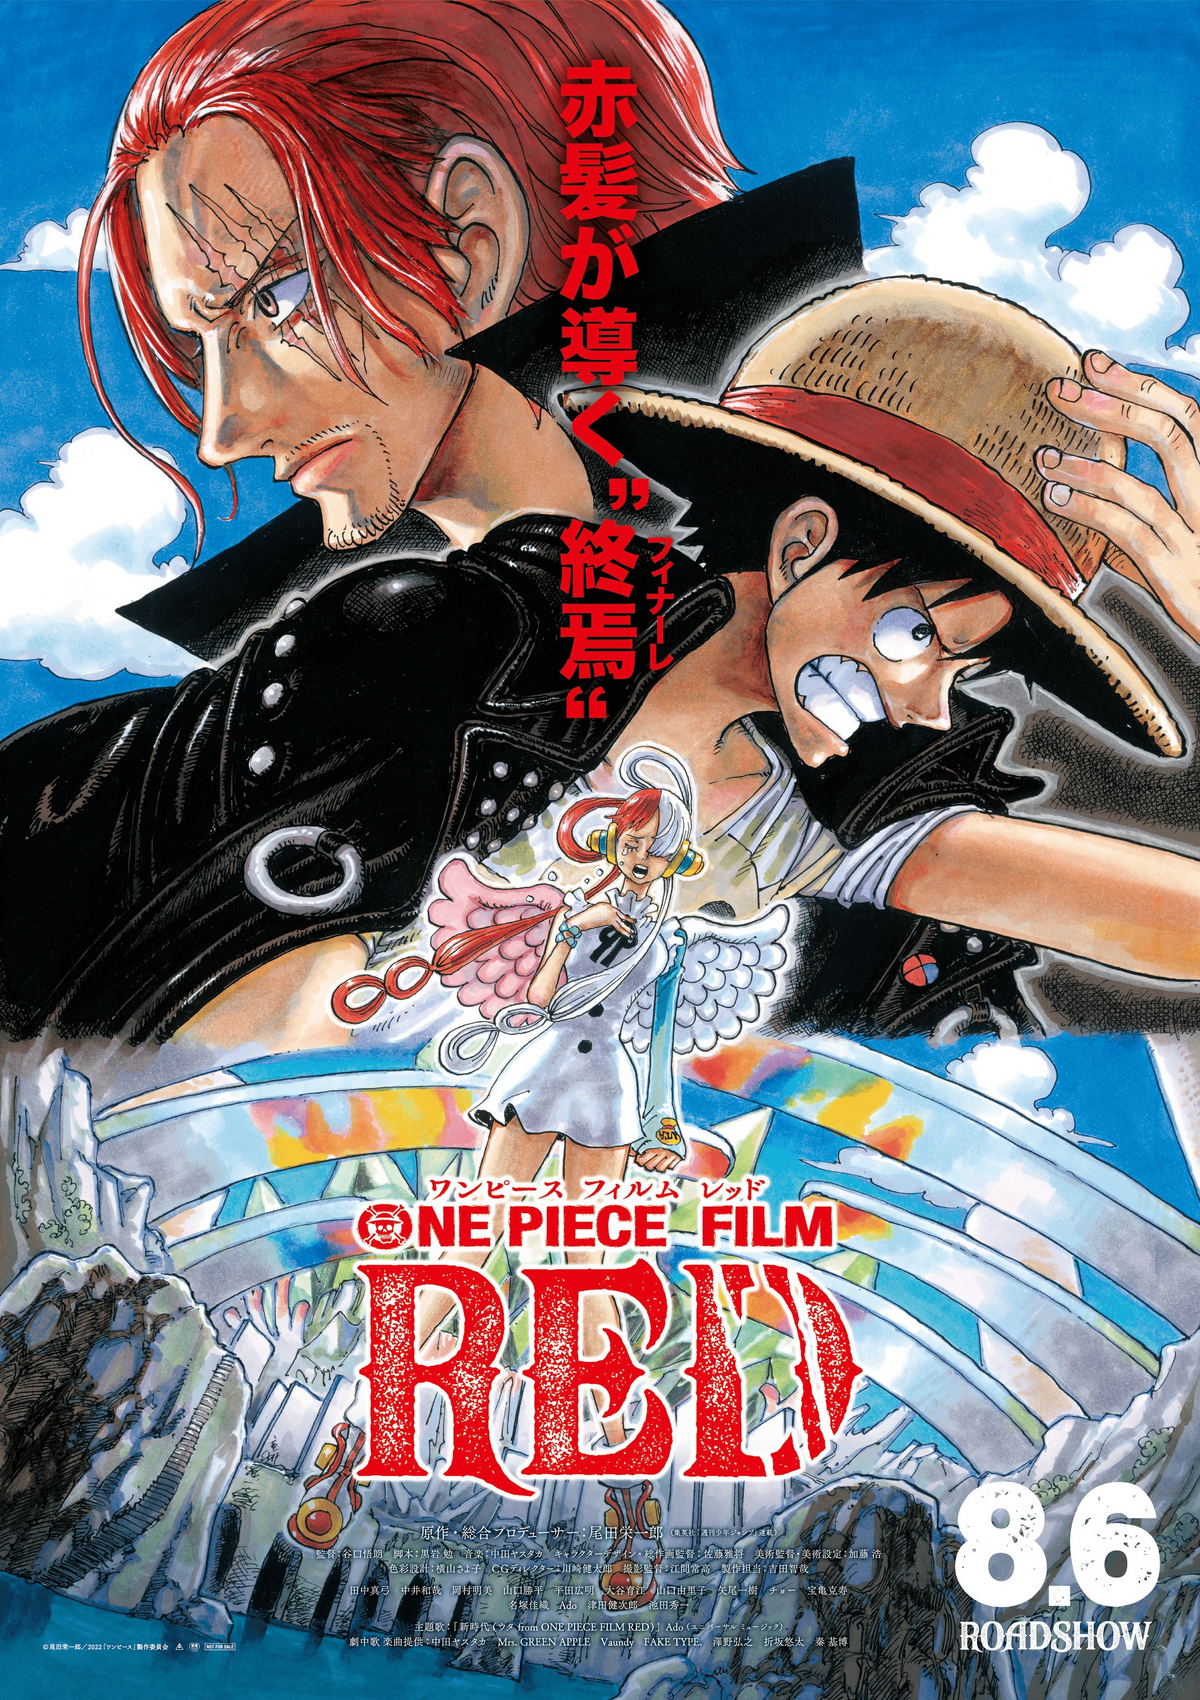 One Piece 2022 Schedule Book Anime Toy  HobbySearch Anime Goods Store